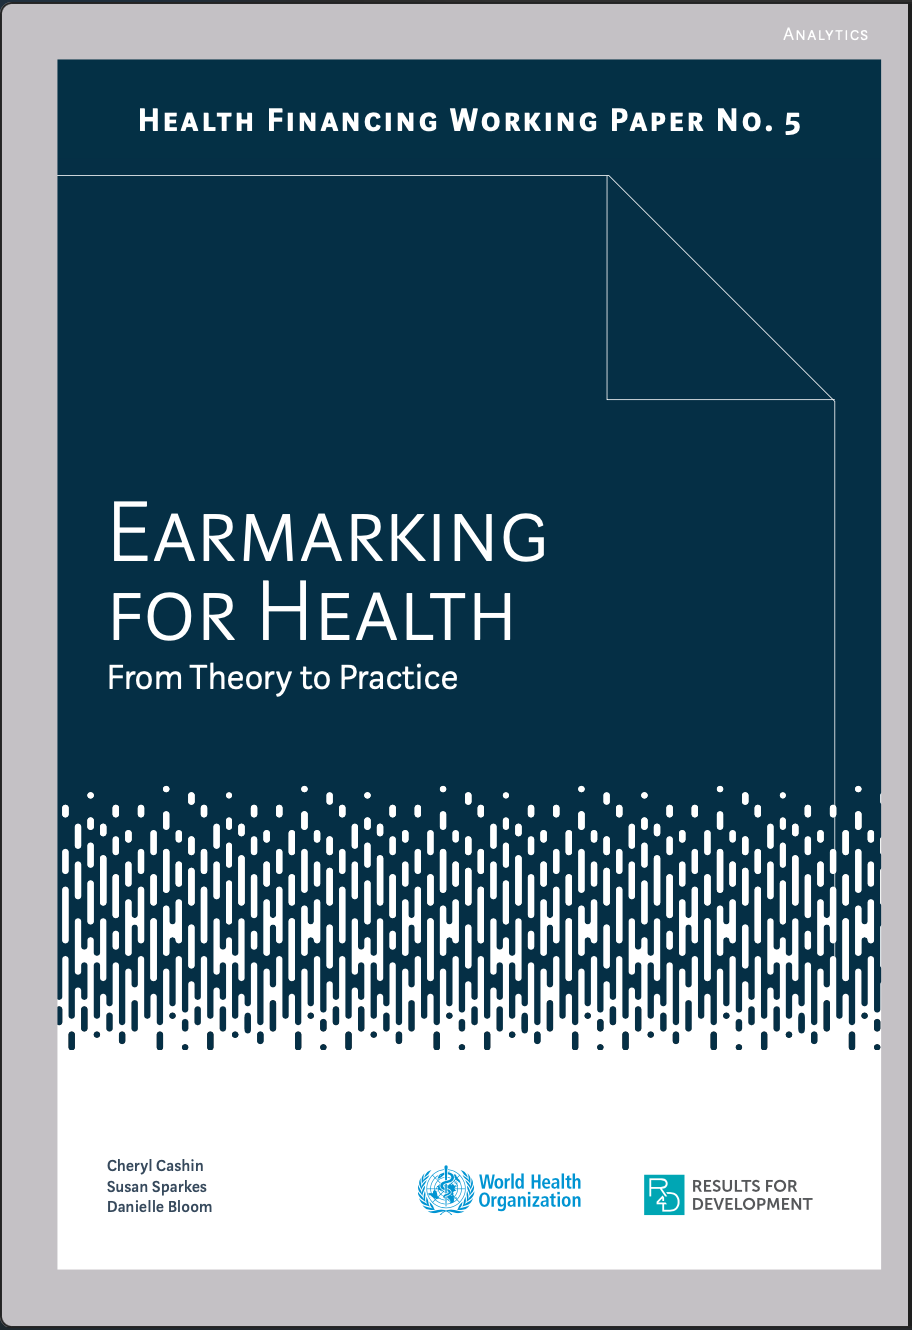 Earmarking for Health: From Theory to Practice (Health Financing Working Paper No.5) (WHO 2017)